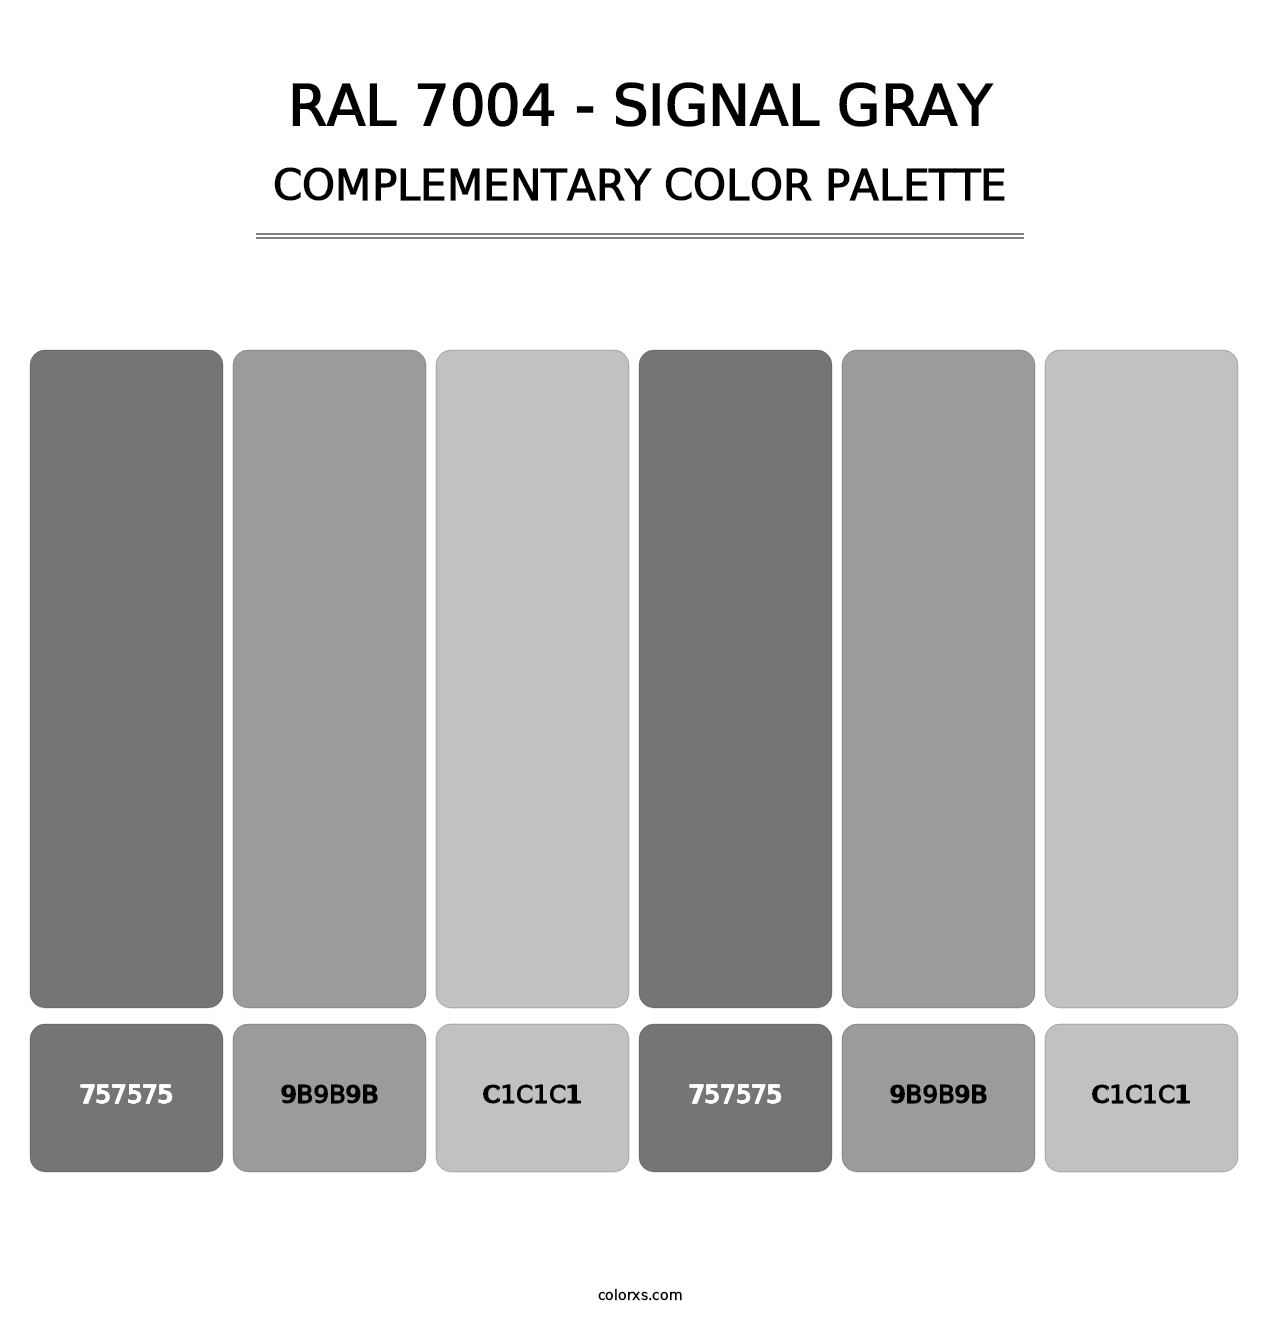 RAL 7004 - Signal Gray - Complementary Color Palette